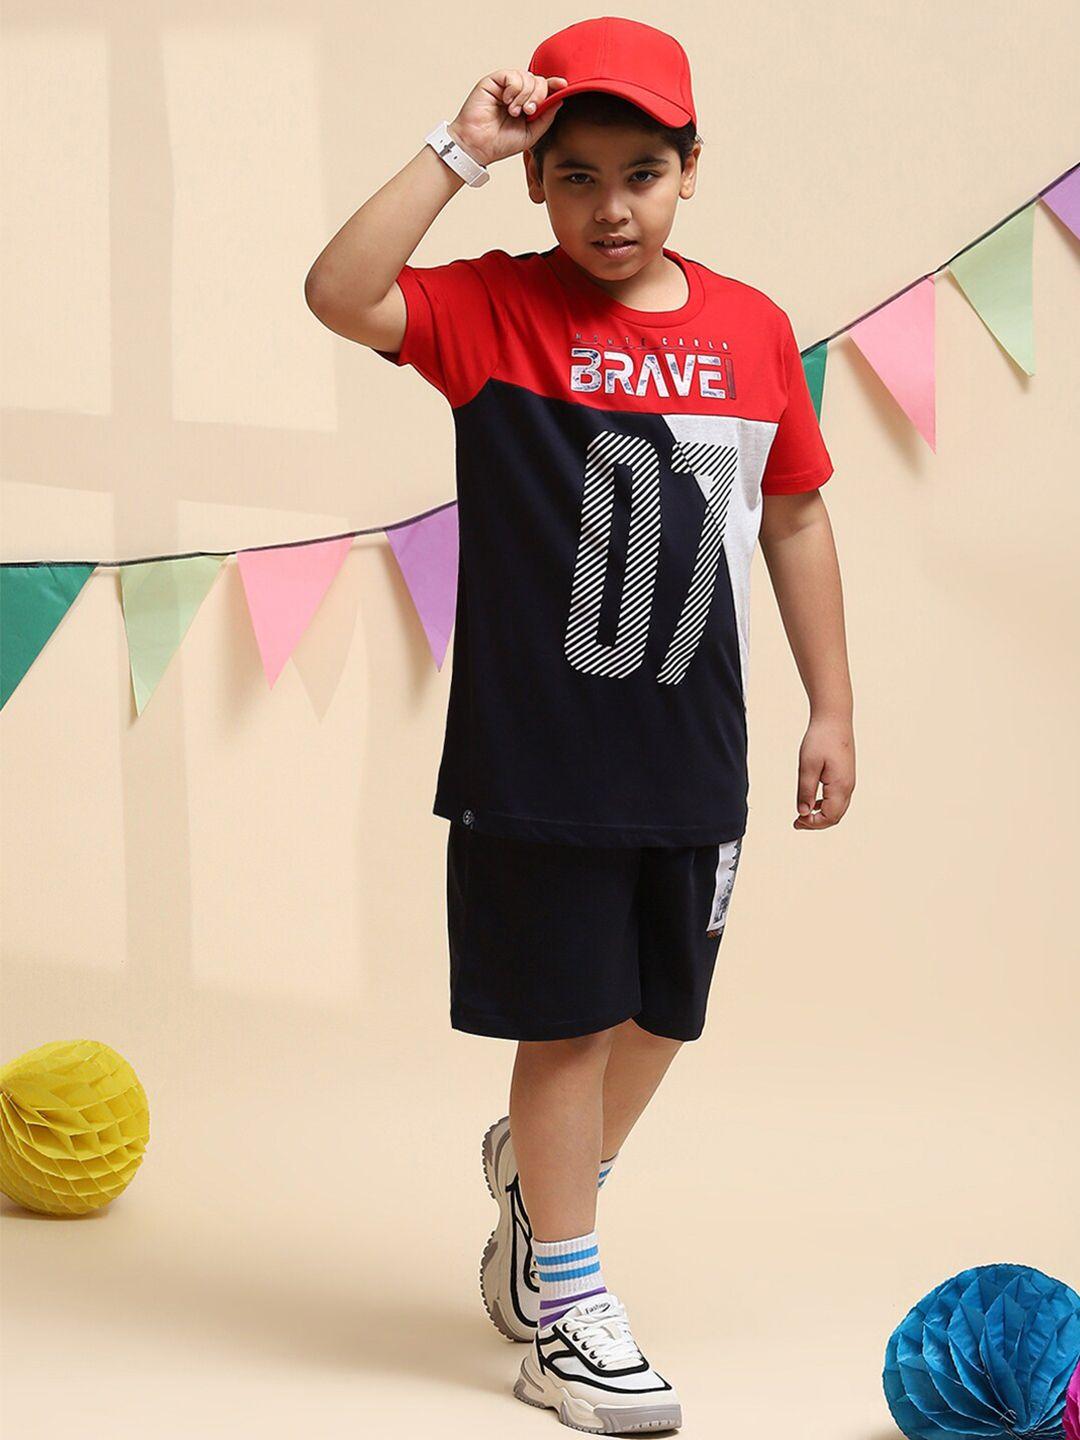 monte carlo boys printed t-shirt with shorts